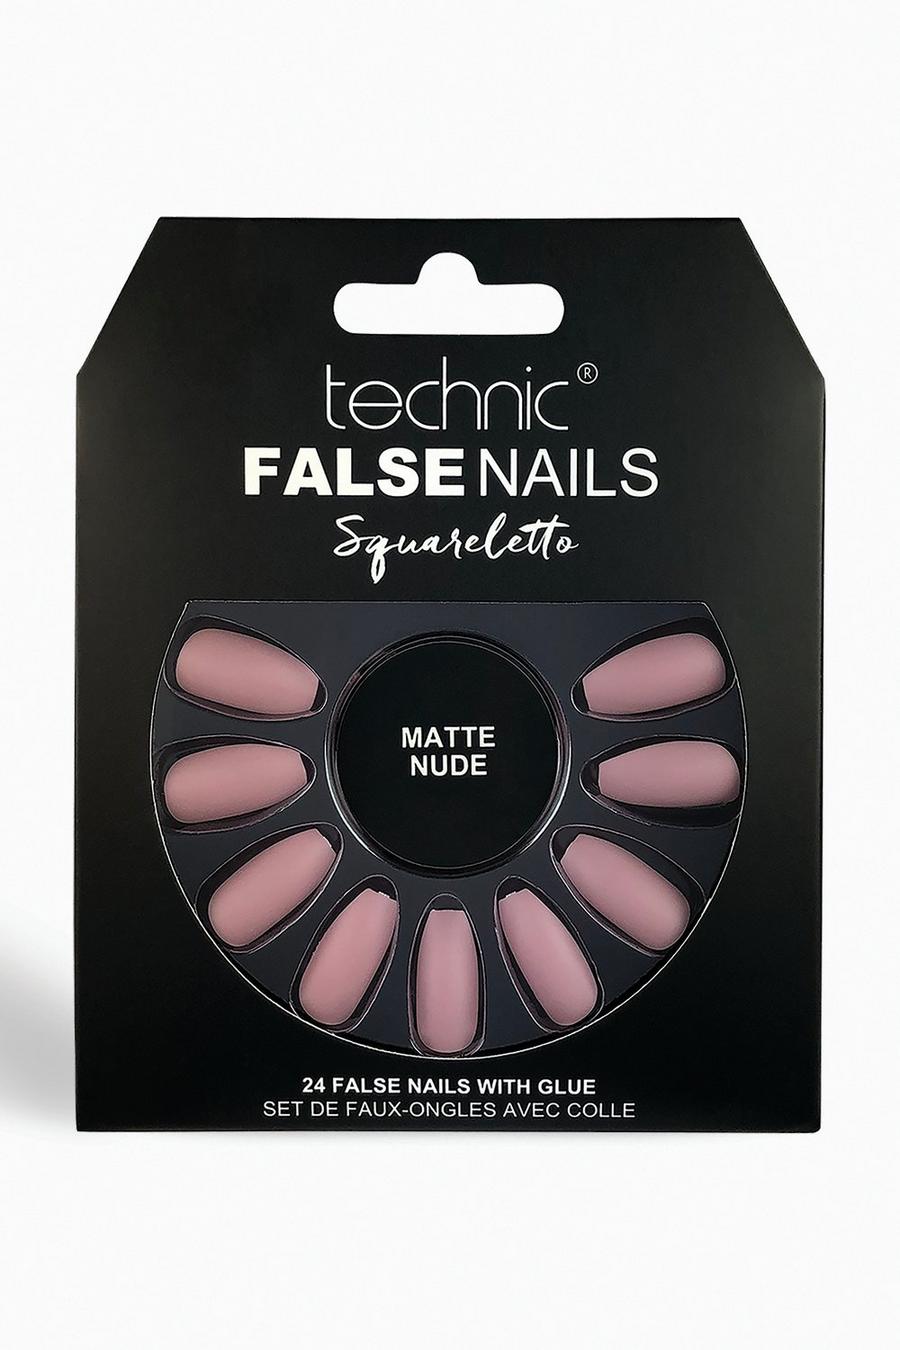 Technic - French unghie squadrate nude matte, Color carne